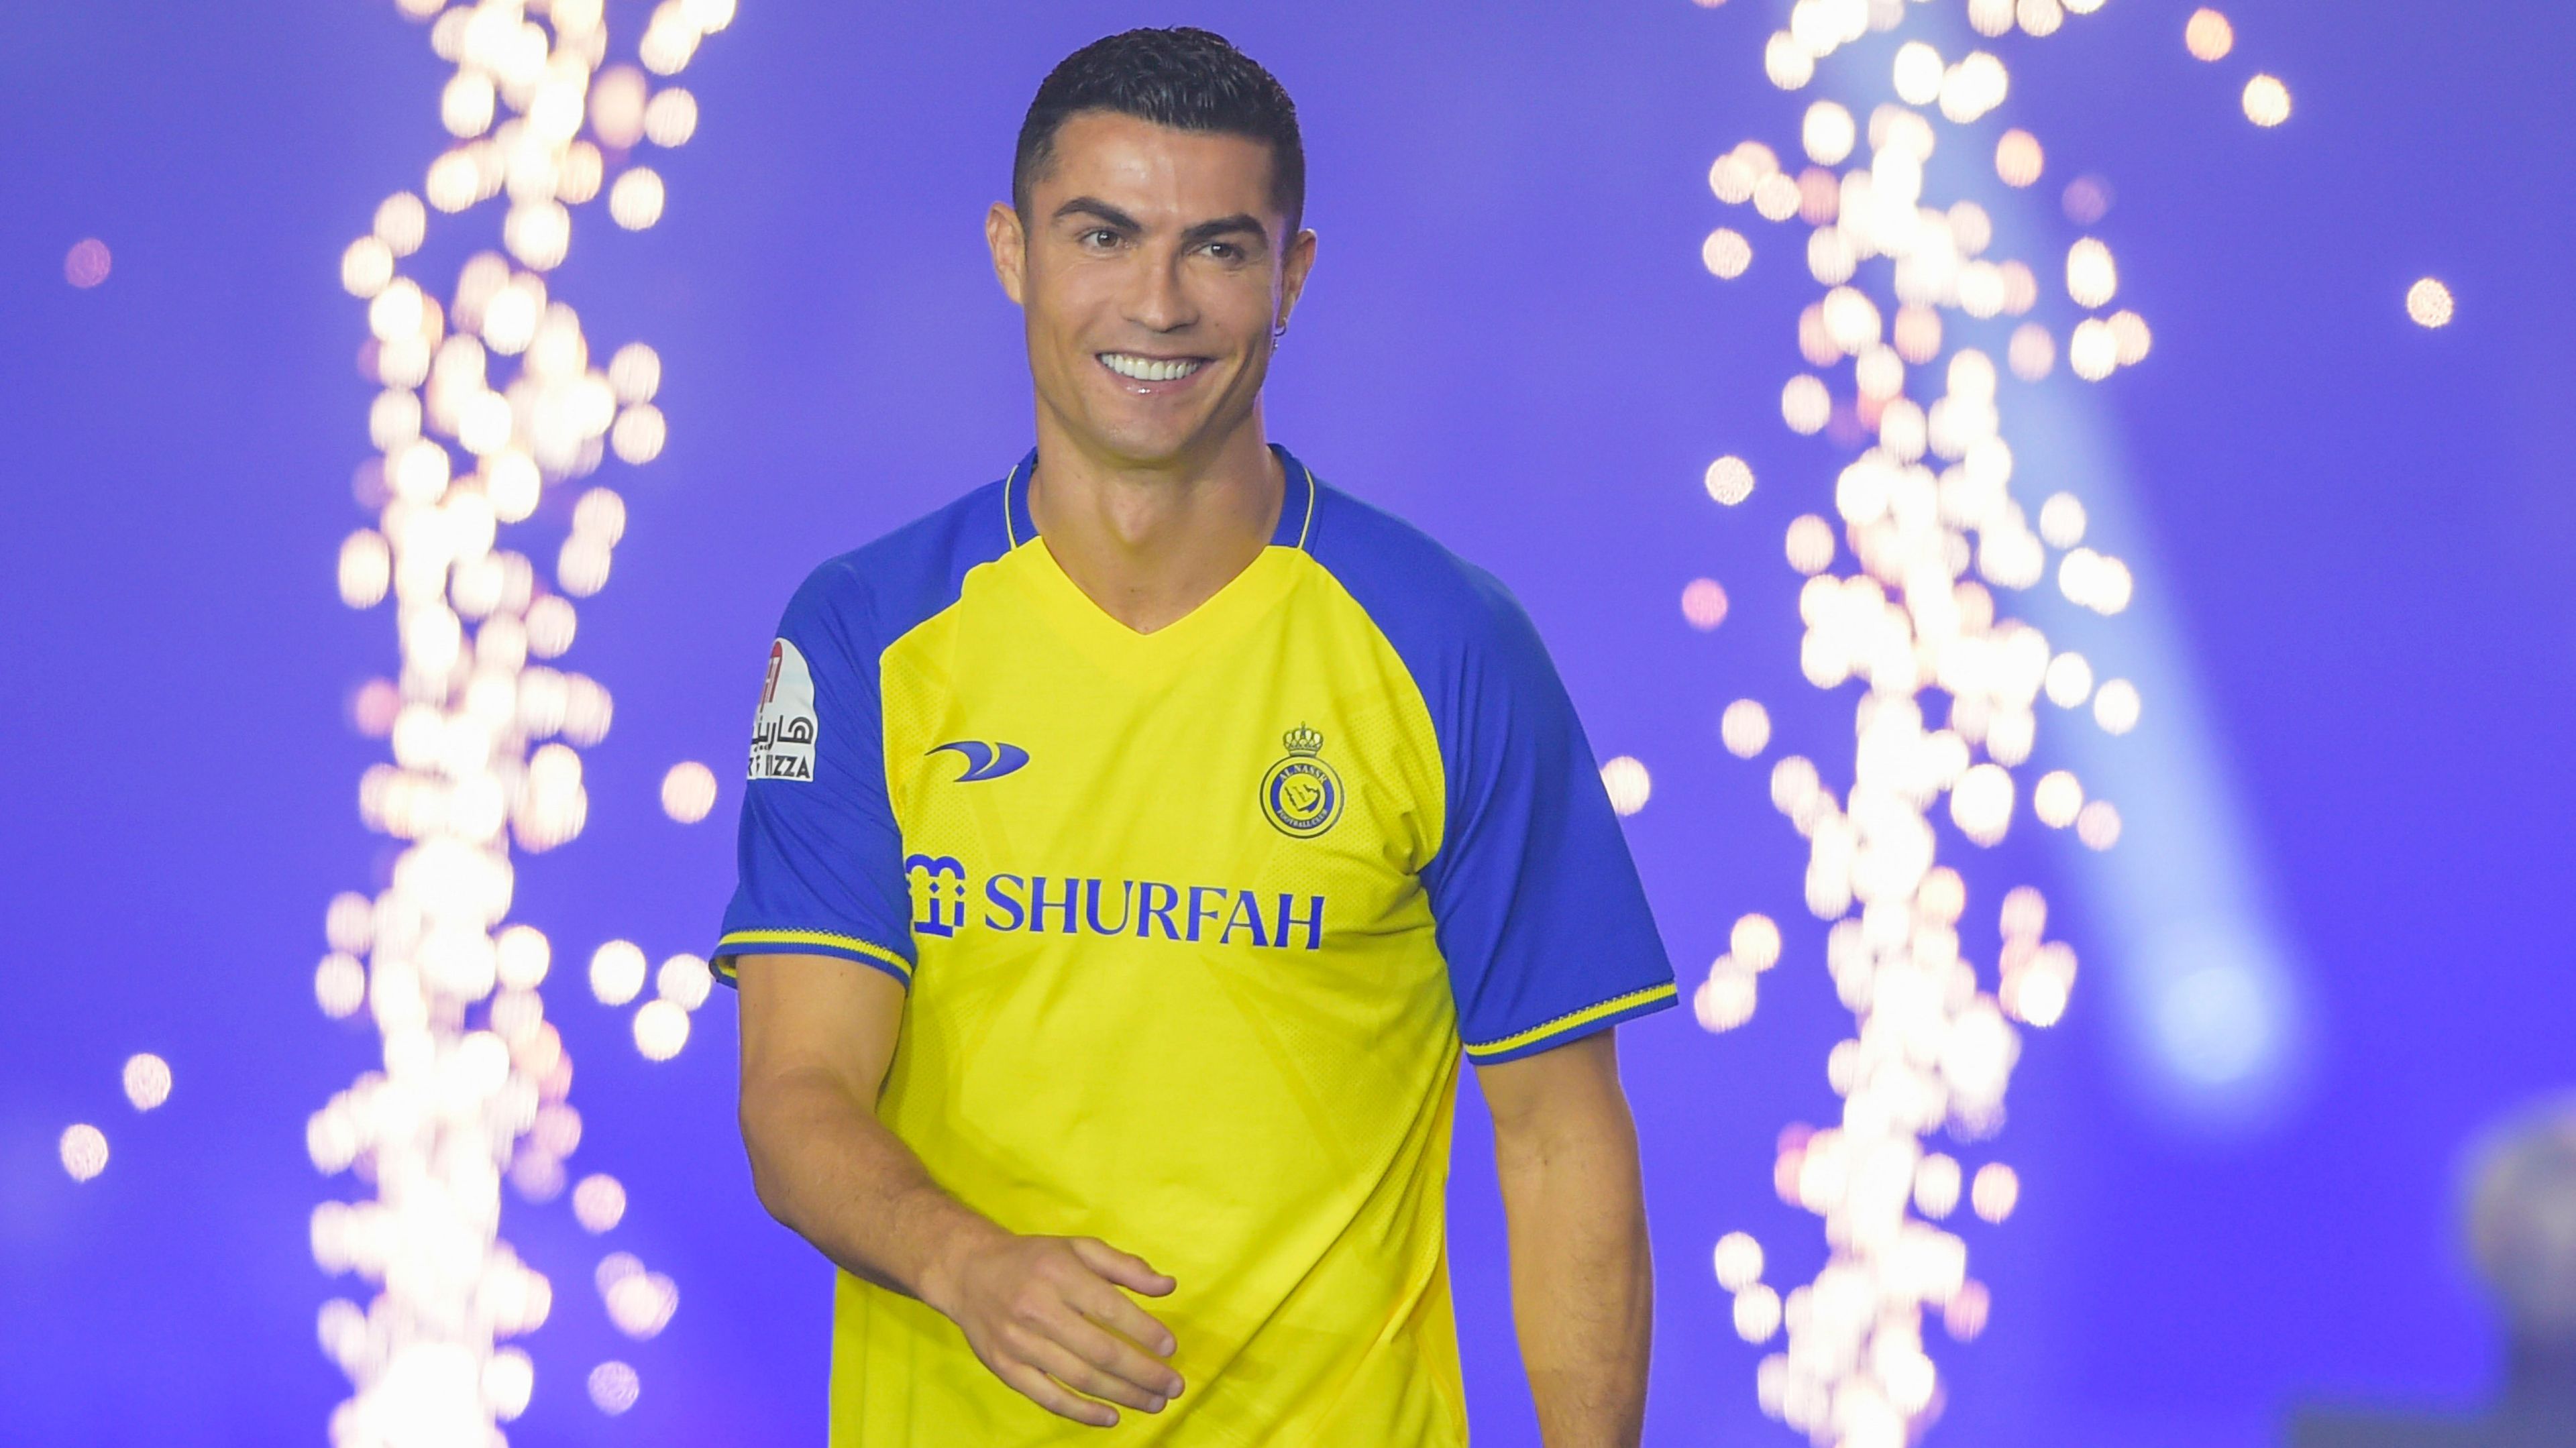 Cristiano Ronaldo smiles as he is unveiled as an Al Nassr player at Mrsool Park Stadium on January 3, 2023 in Riyadh, Saudi Arabia. (Photo by Khalid Alhaj/MB Media/Getty Images)